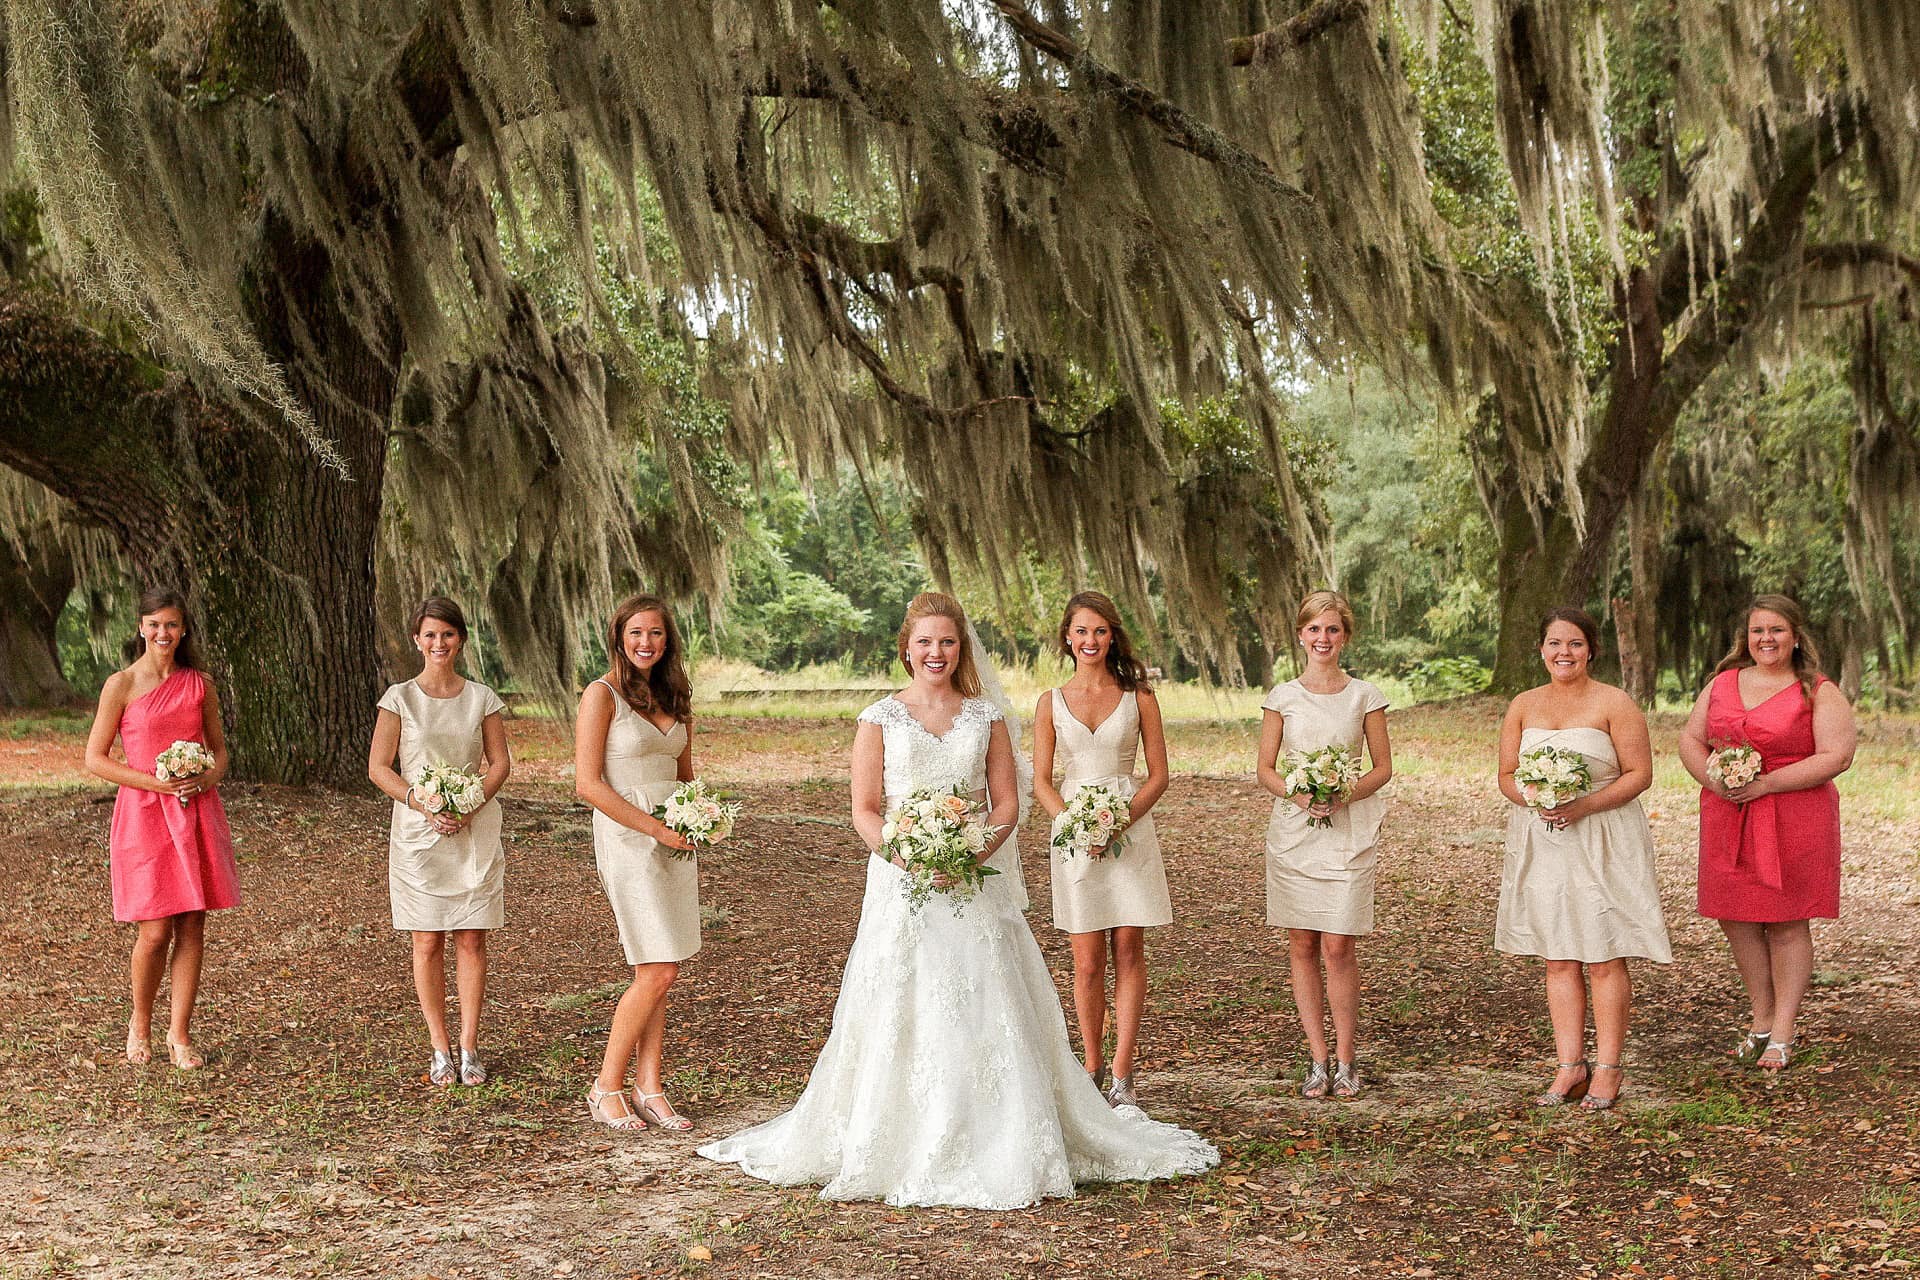 Bridal party standing under a tree with Spanish moss.